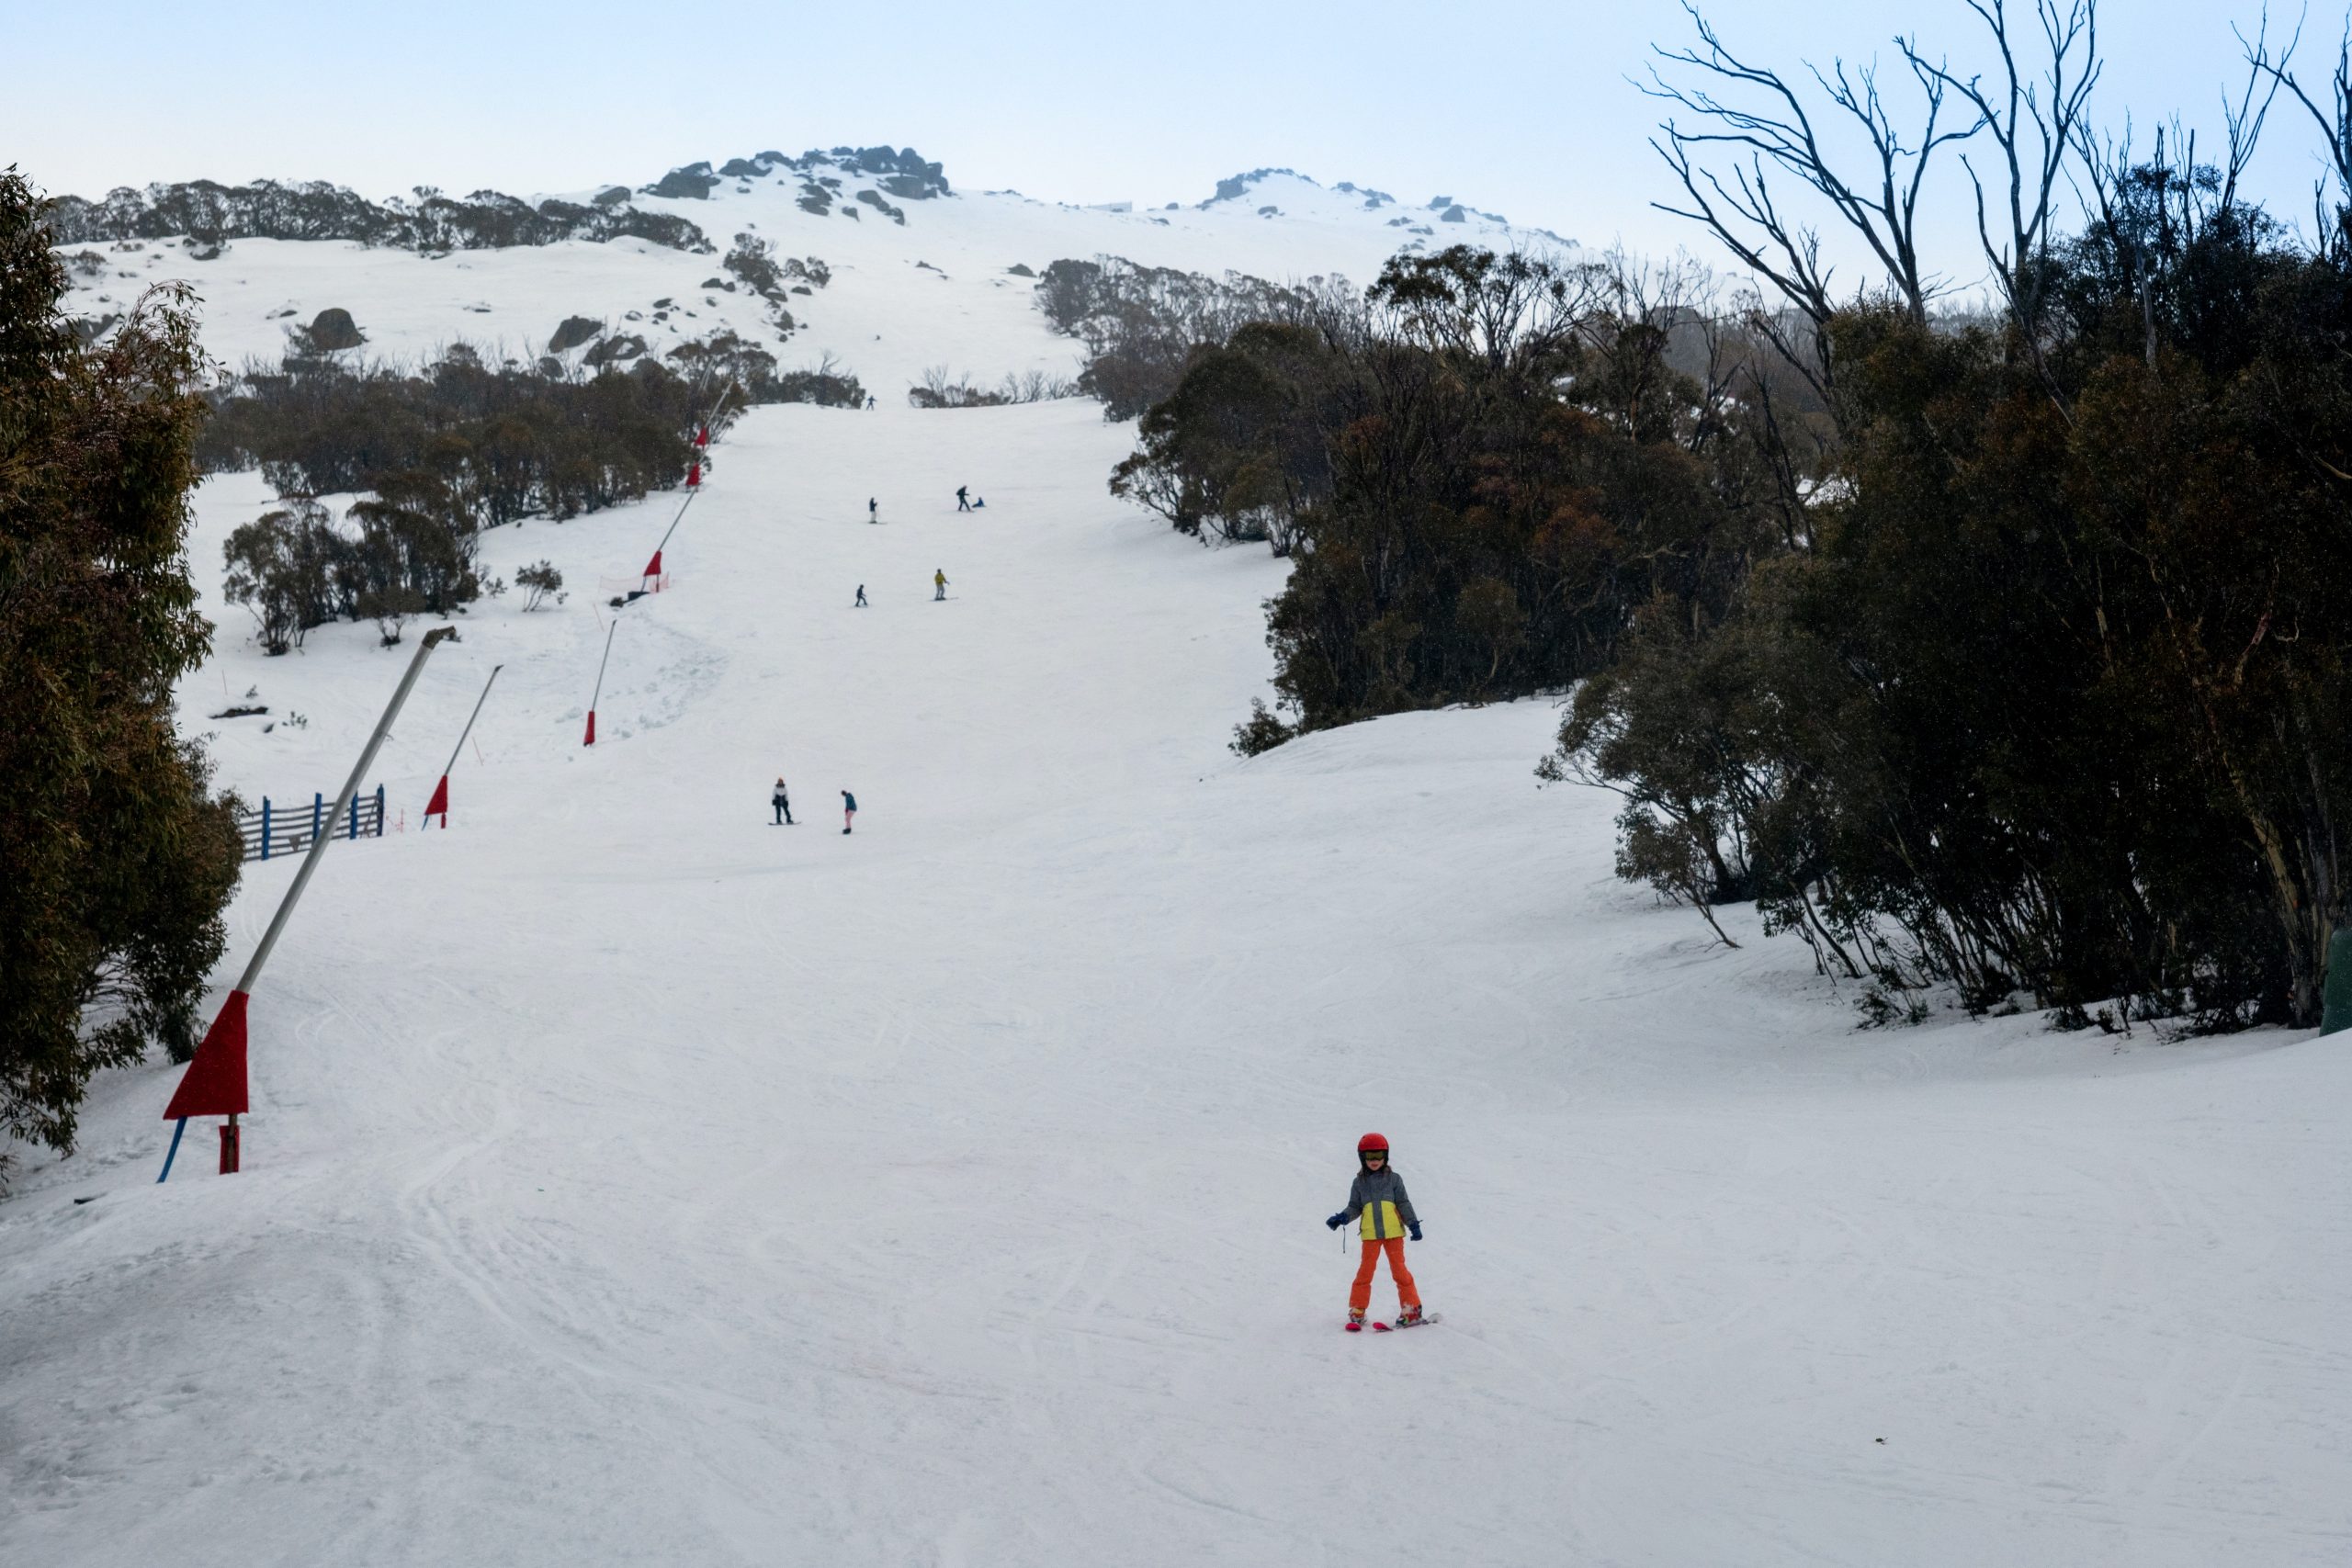 Skiers on the slopes of Thredbo in New South Wales, Australia - not far from Sydney during the winter.